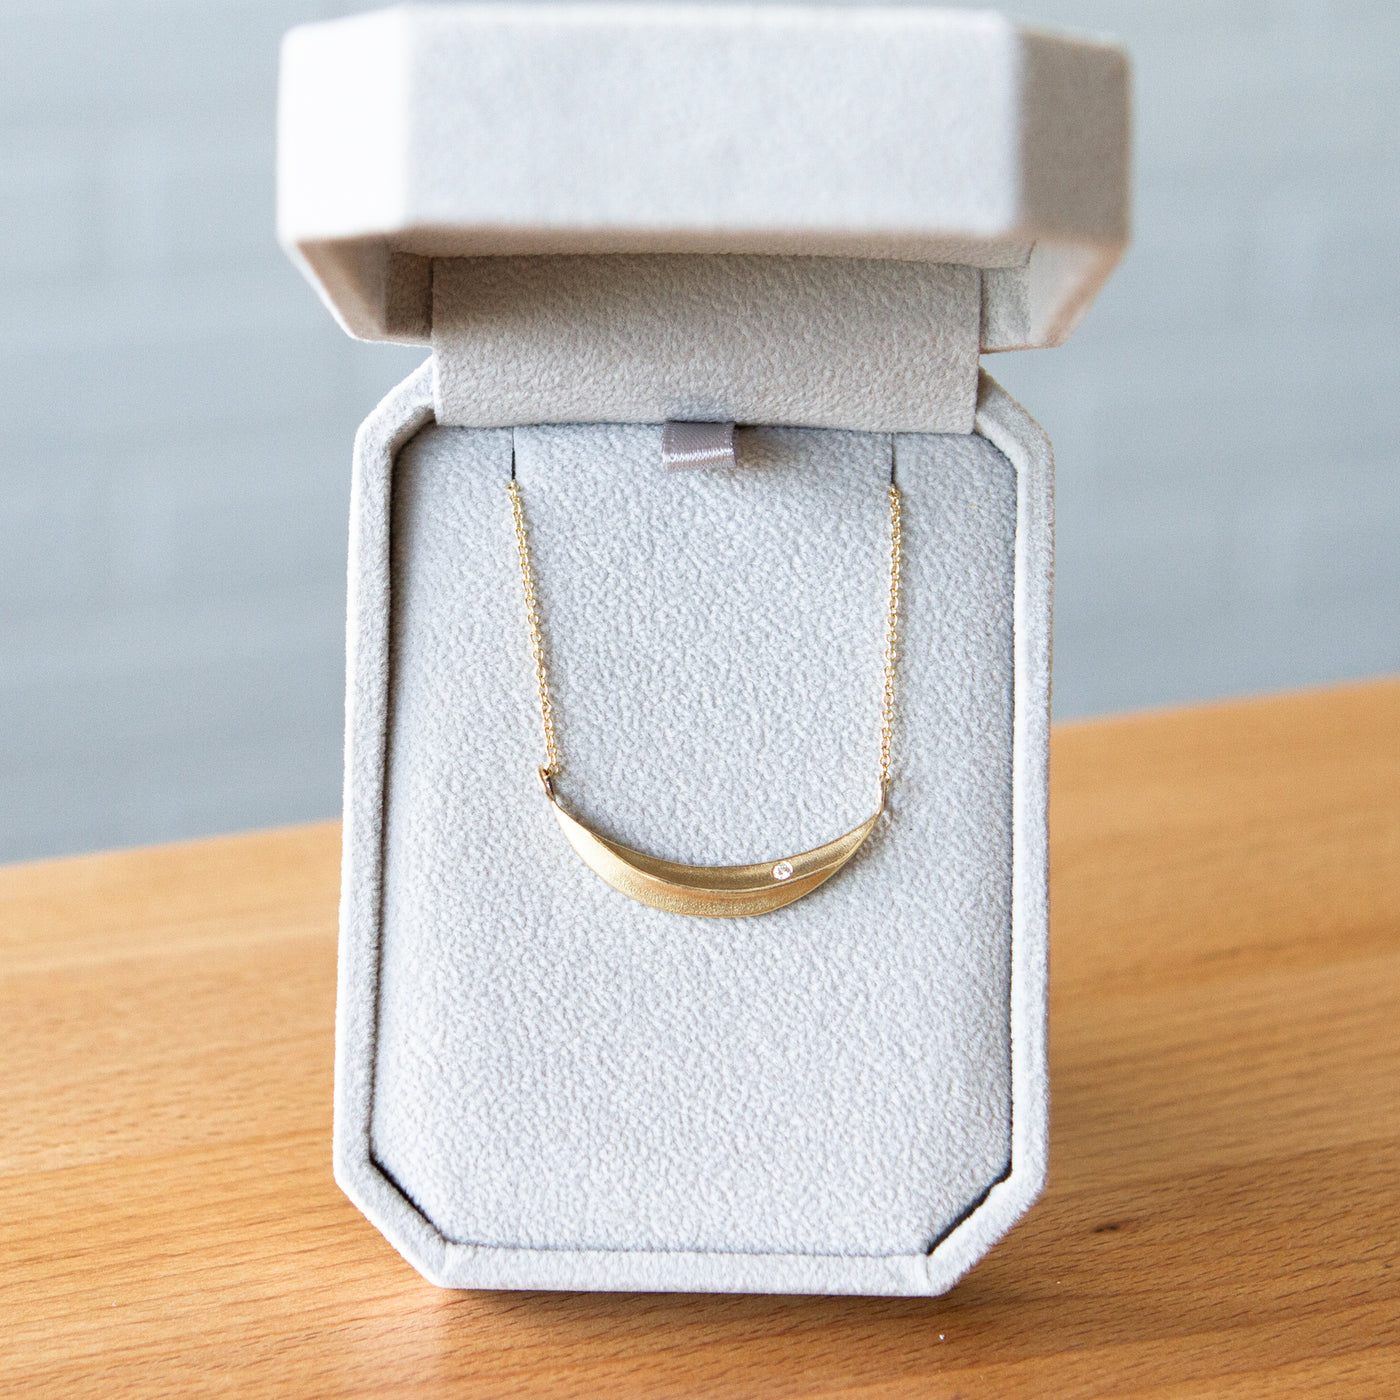 Gold and Diamond Wisp Necklace by Corey Egan  in a gift box